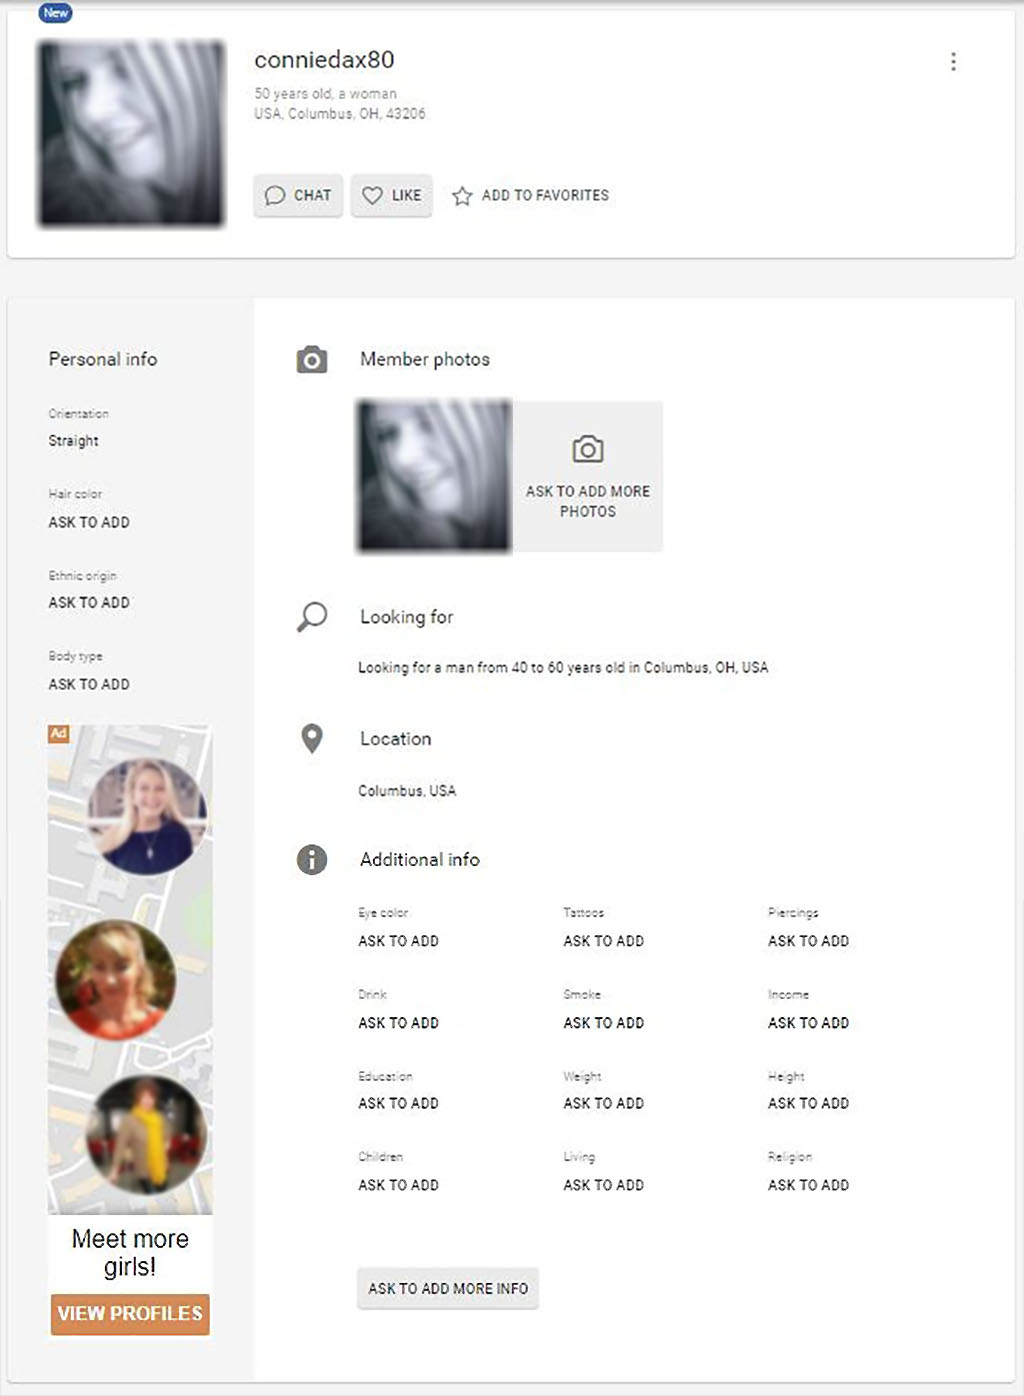 A sample of a profile with only one photo and hardly any photos